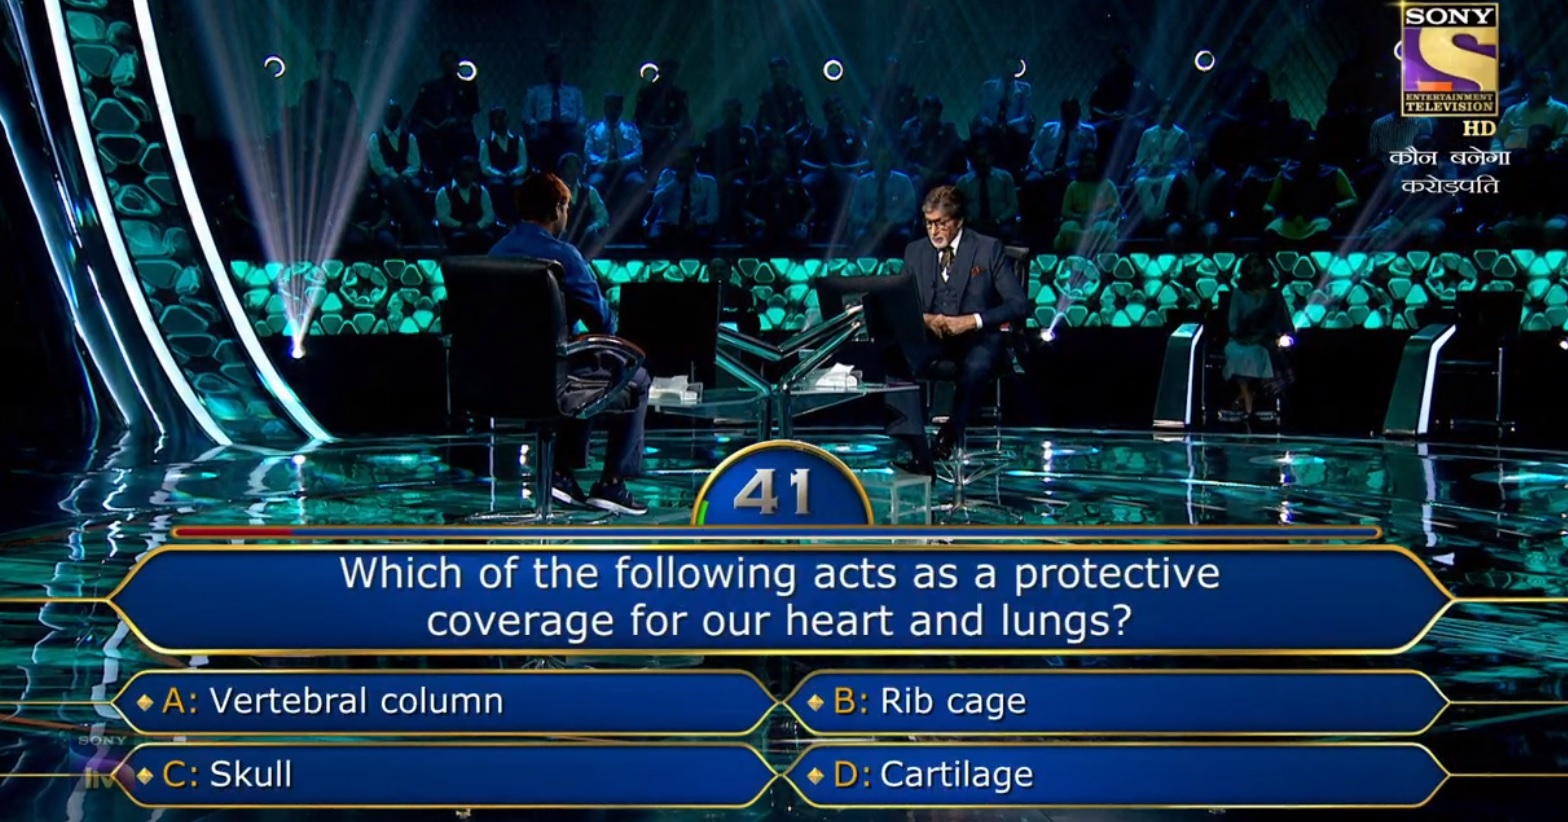 Ques : Which of the following acts as a protective coverage for our heart and lungs?